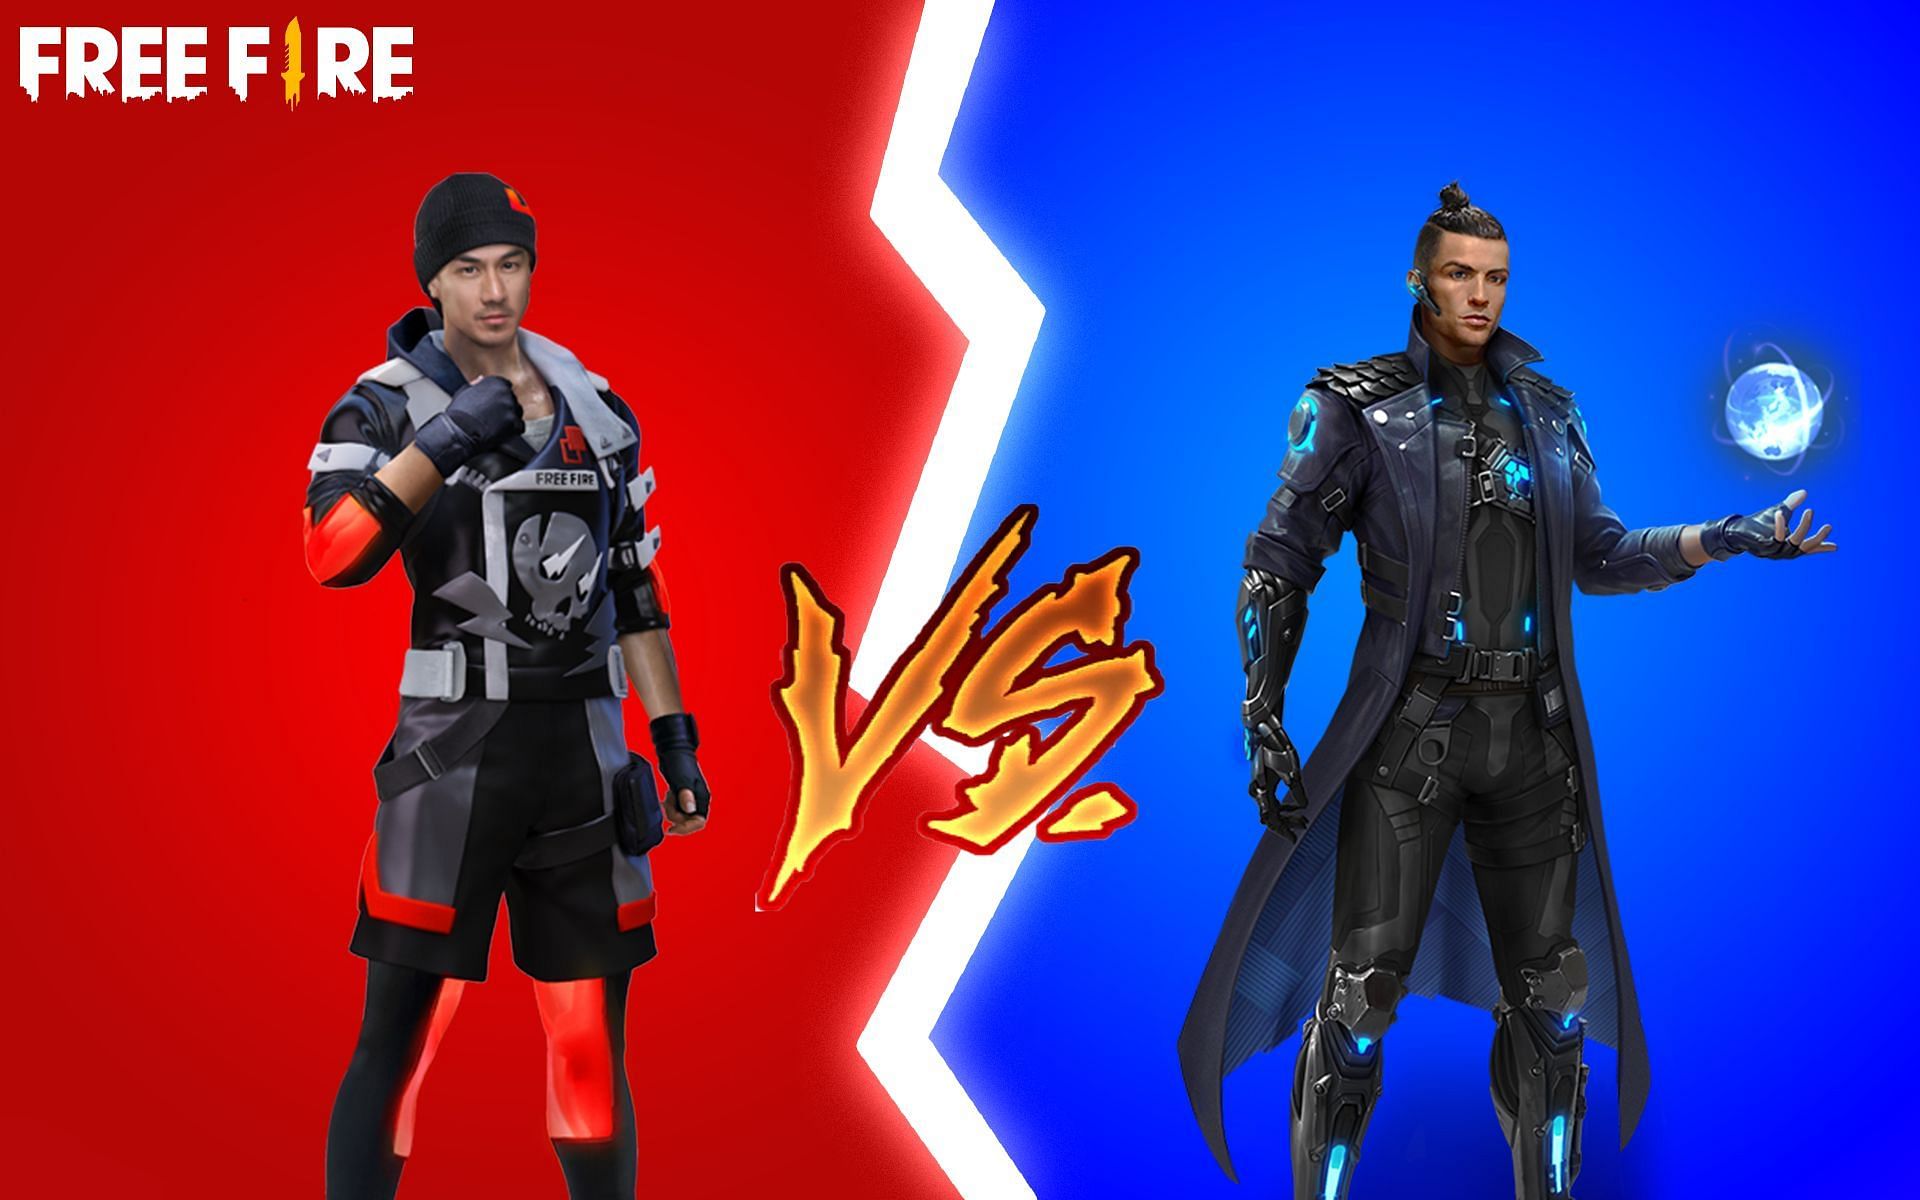 Jota vs Chrono: Which is the better character after the Free Fire OB31 update? (Image via Sportskeeda)